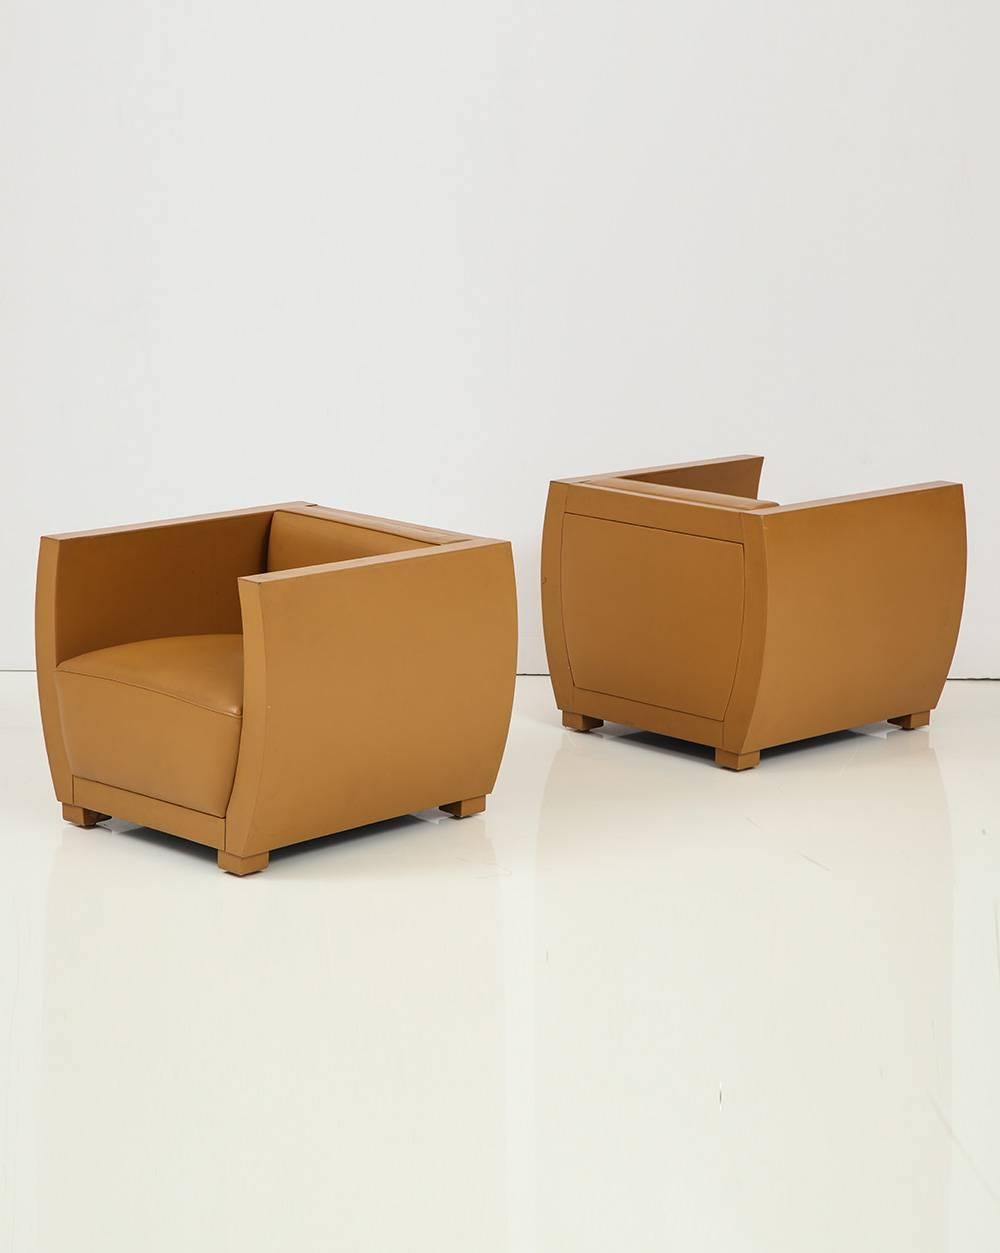 Pair of camel colored leather clad club chairs.
American, circa 1990.